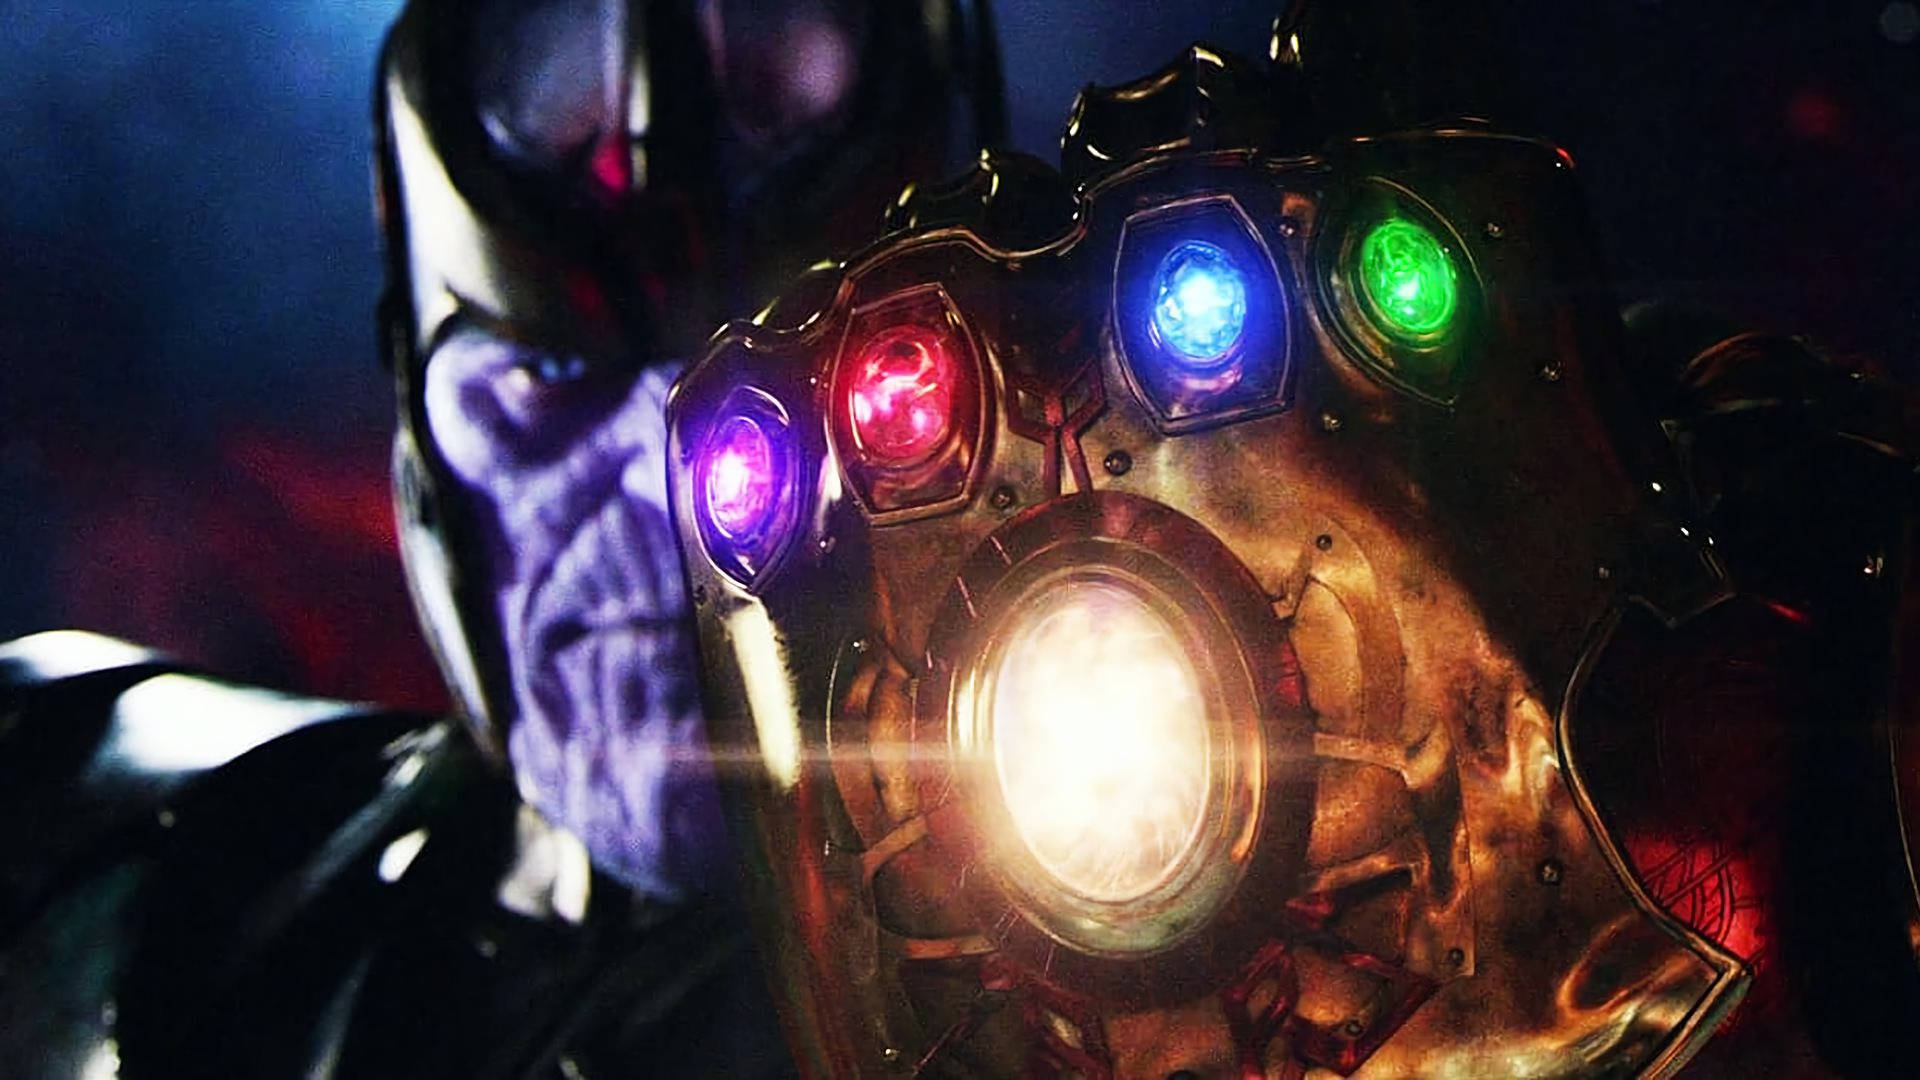 Thanos wielding the six infinity stones in the palm of his hand. Wallpaper